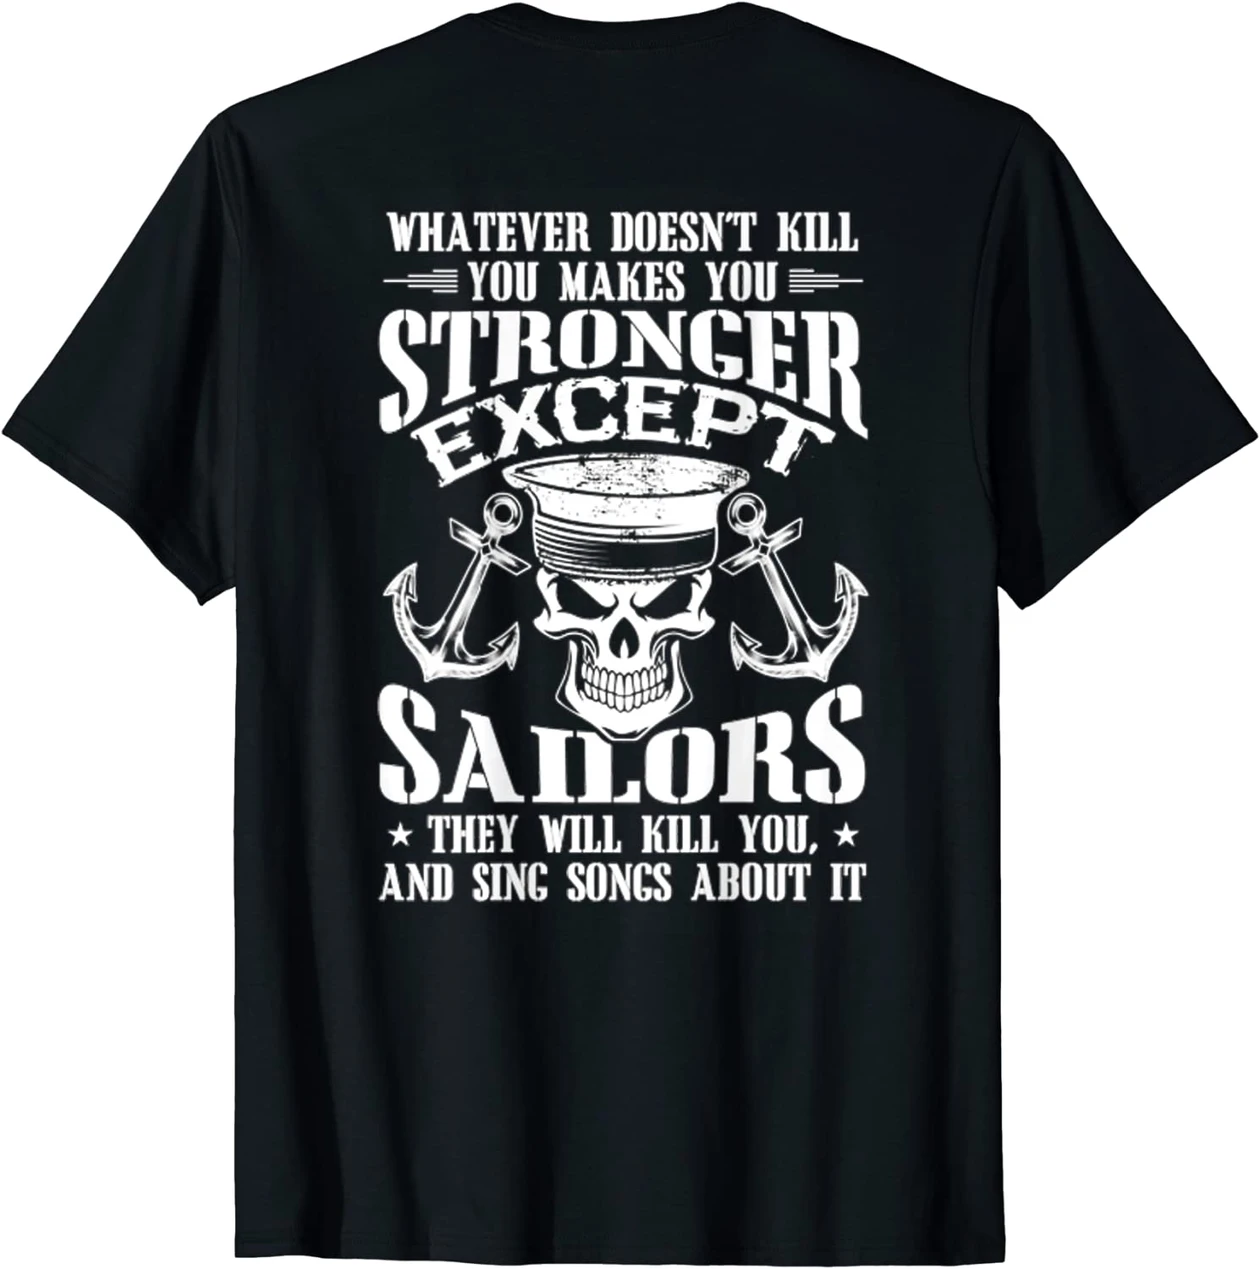 Sailors They Will Kill You And Sing Songs About It Proud Royal Navy Veteran Shirt